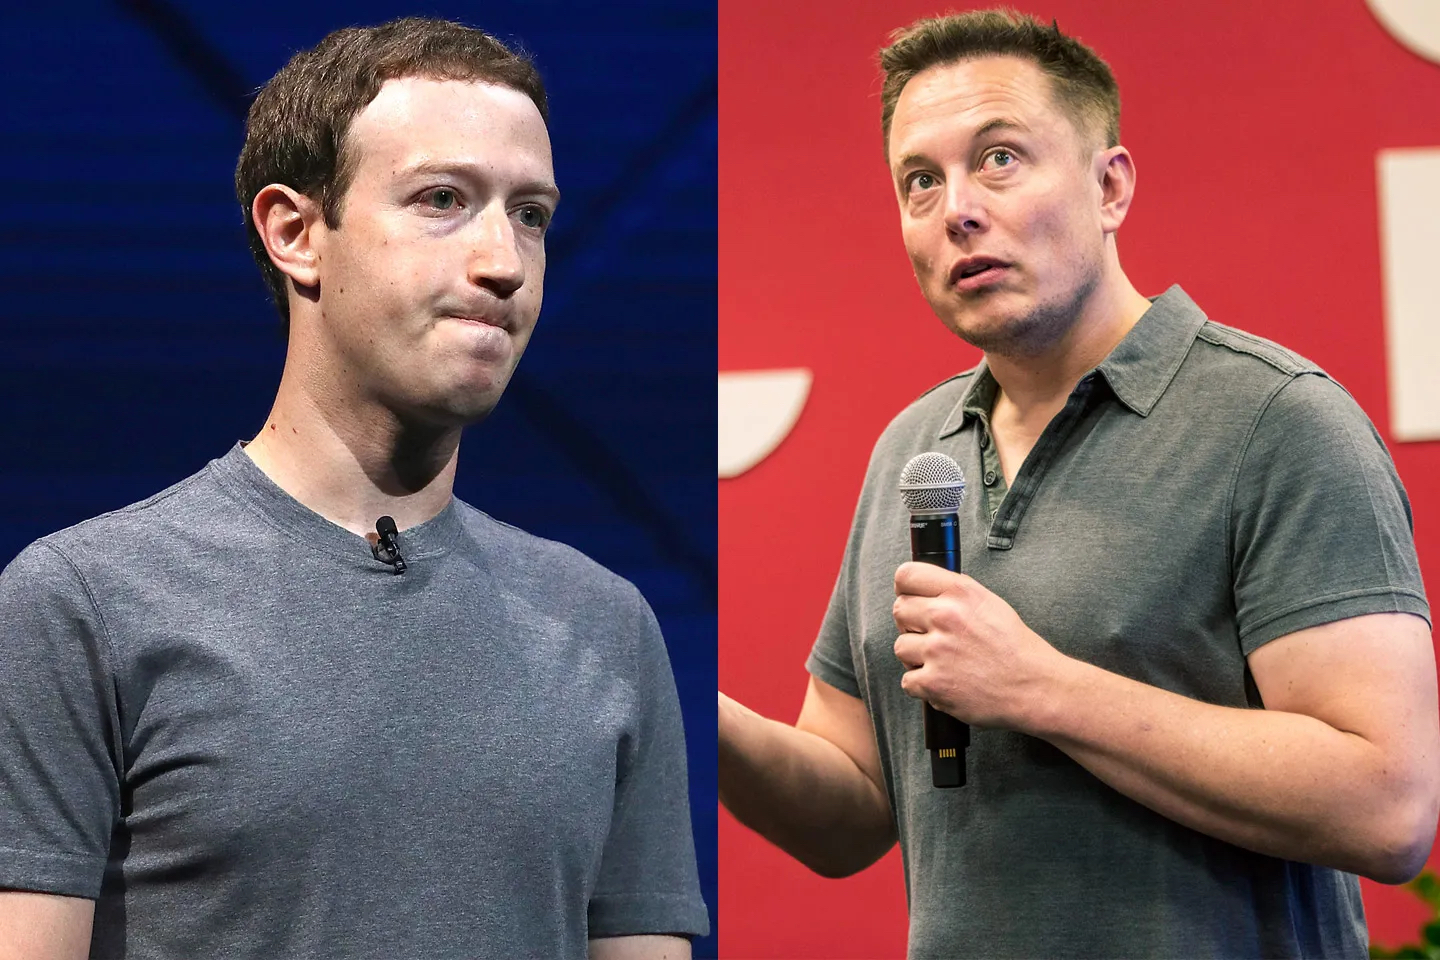 Say What Now? Mark Zuckerberg Is Ready to Fight Elon Musk in a Cage Match: ‘Send Me Location’